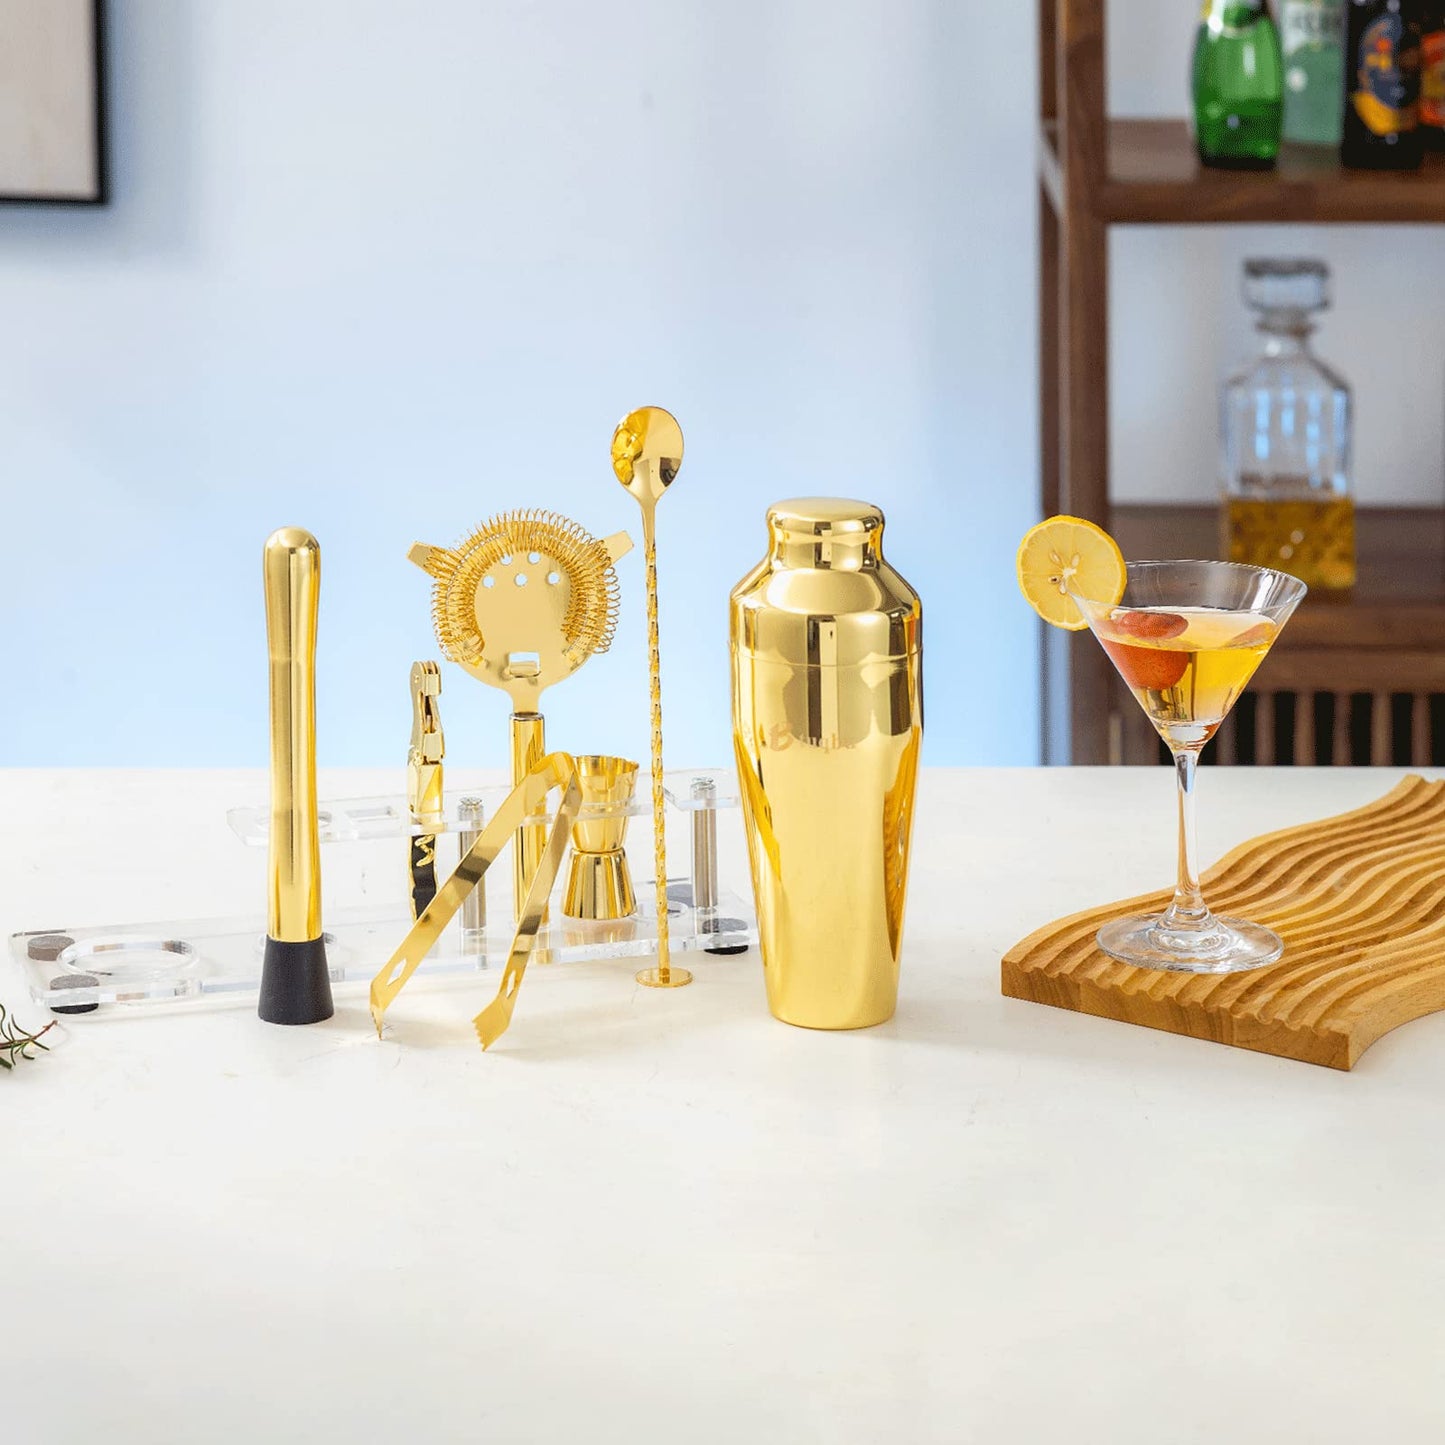 Btuqbu Cocktail Shaker Set with Arcylic Stand, Mixology Bartender Kit for Drink Mixing | Mixology Set with 7 Bar Set Tools Cocktail Kit (Gold)